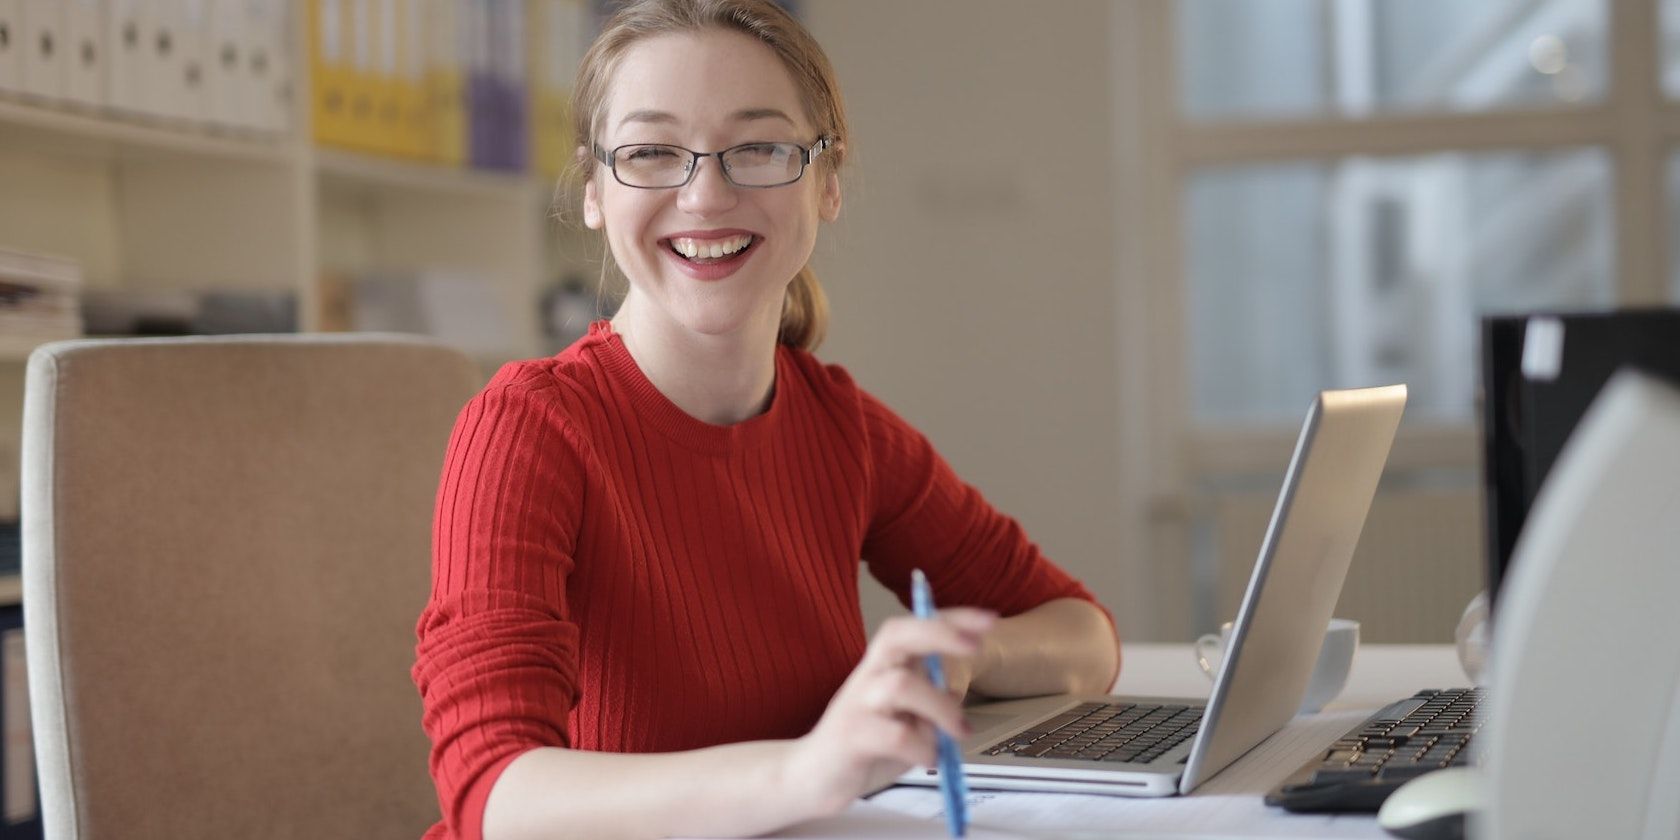 Smiling Woman on Work Desk